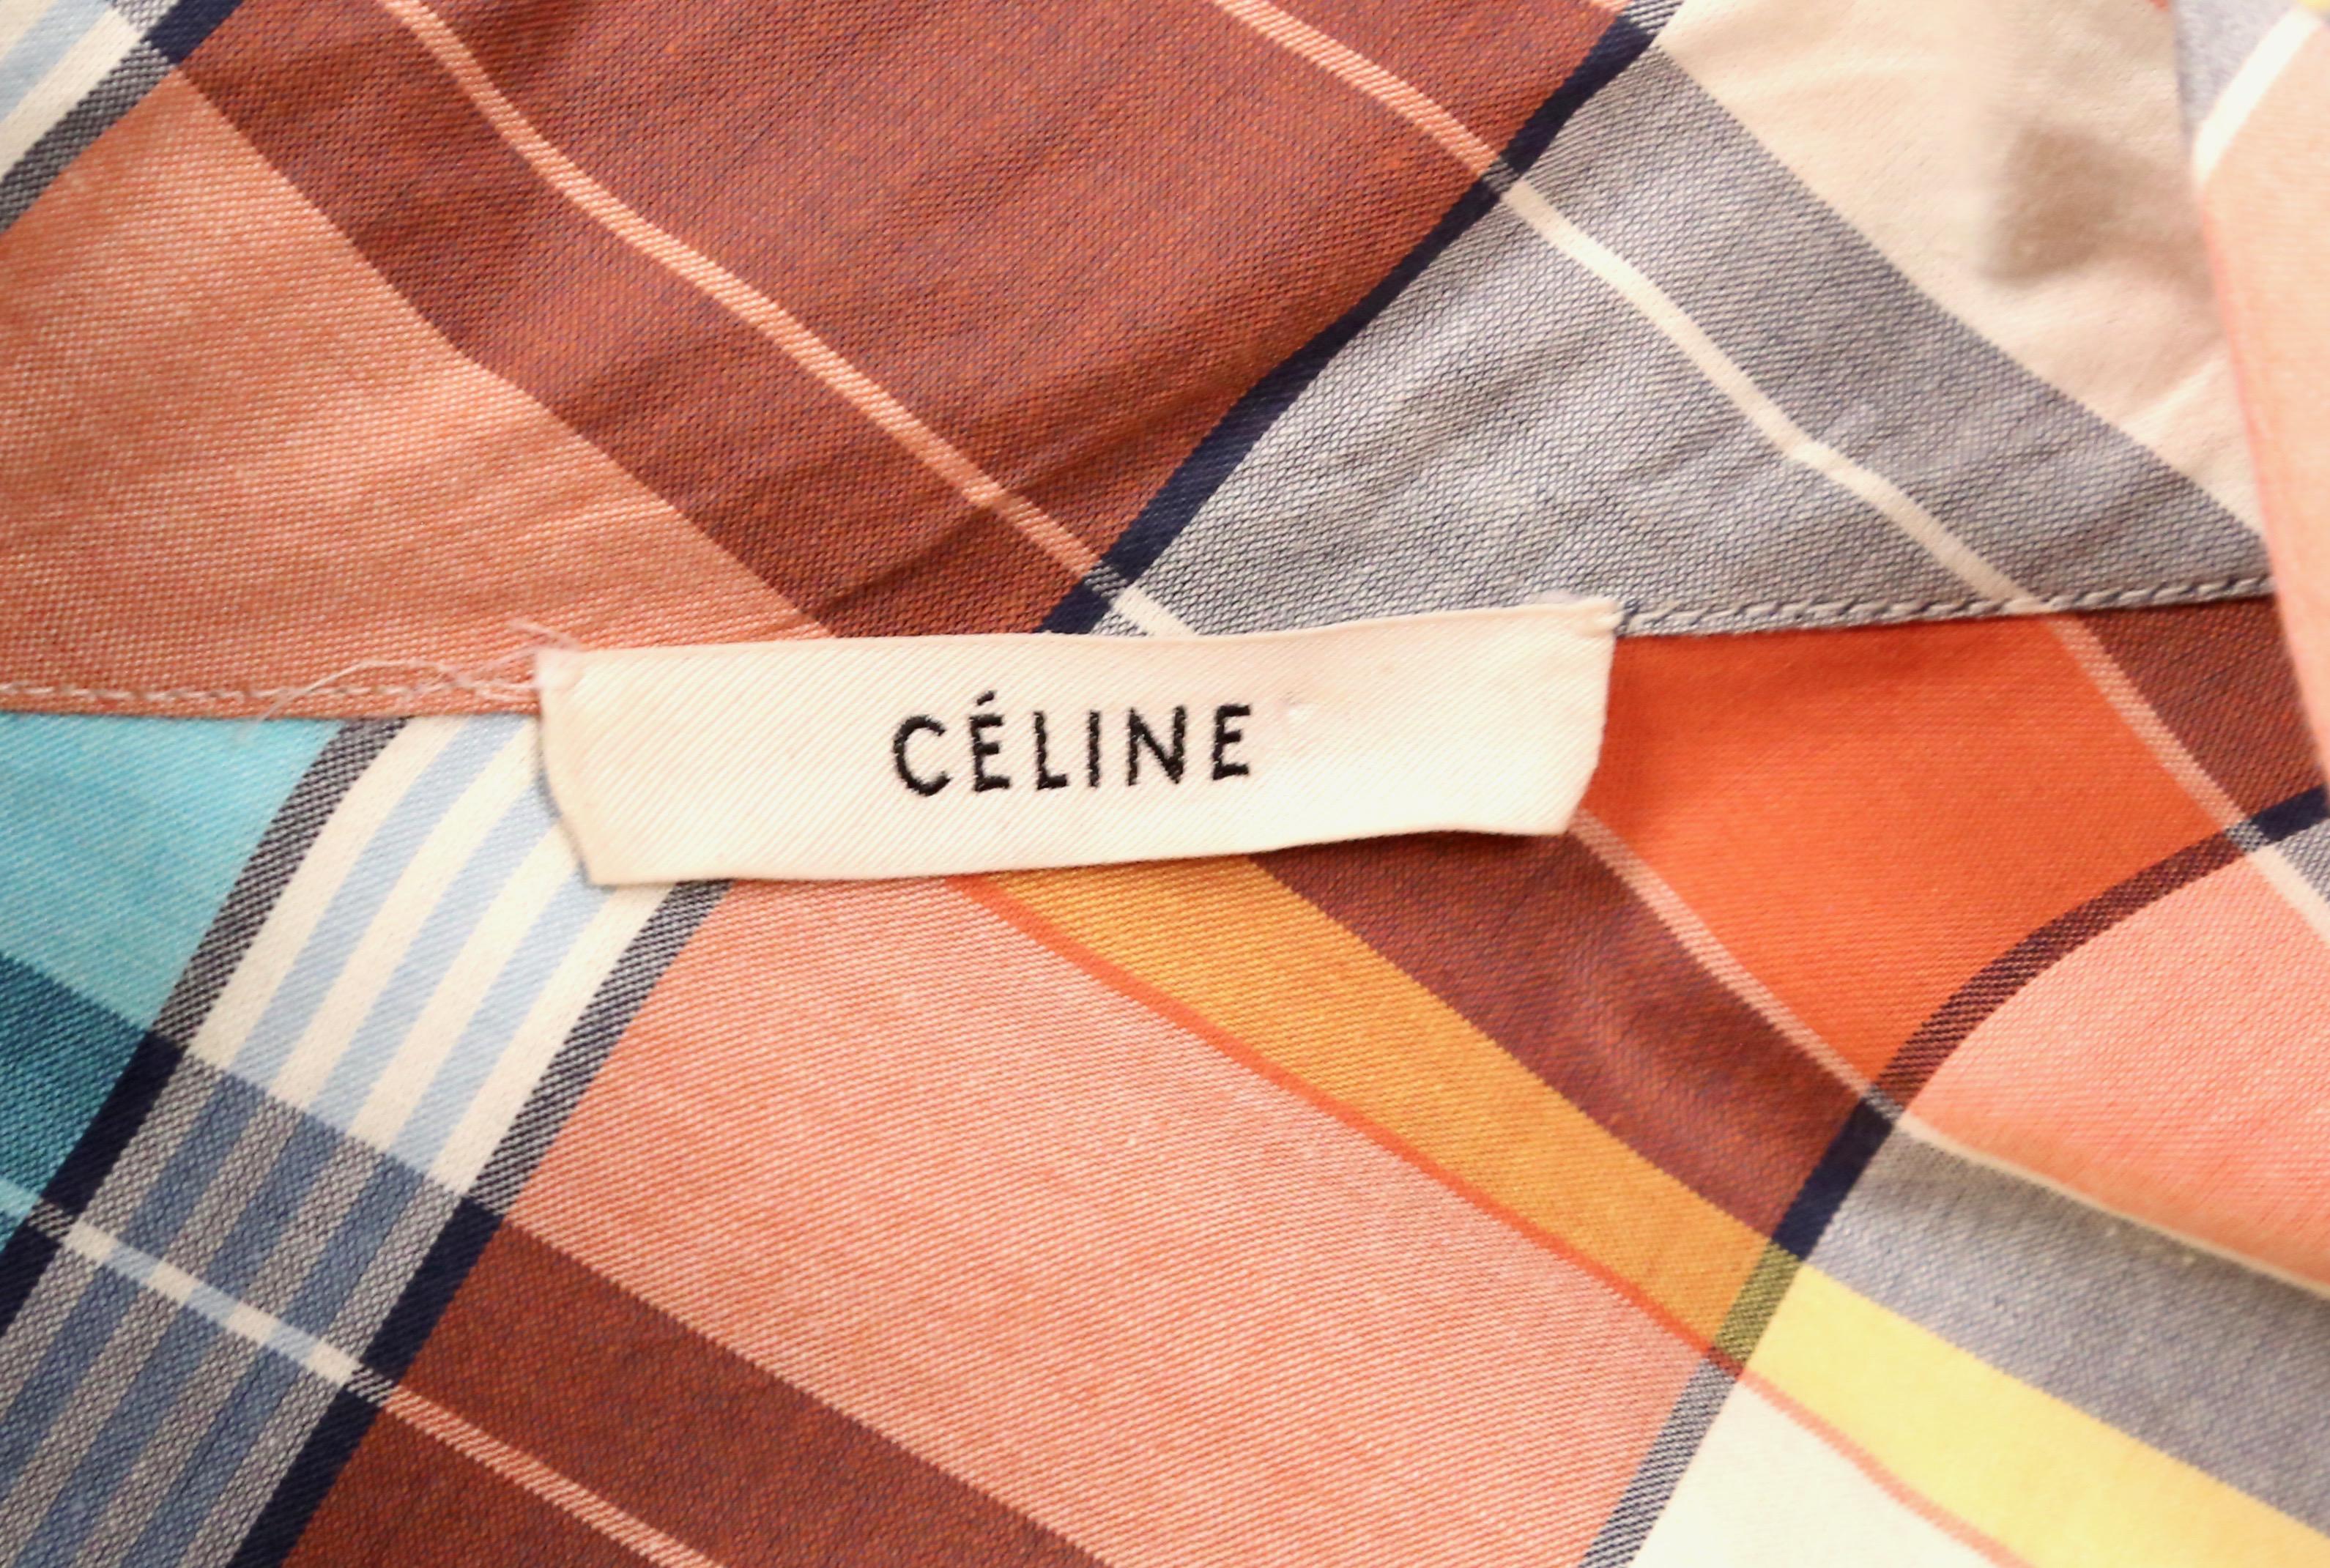 Women's or Men's 2013 CELINE by PHOEBE PHILO plaid cotton runway top with draped neck